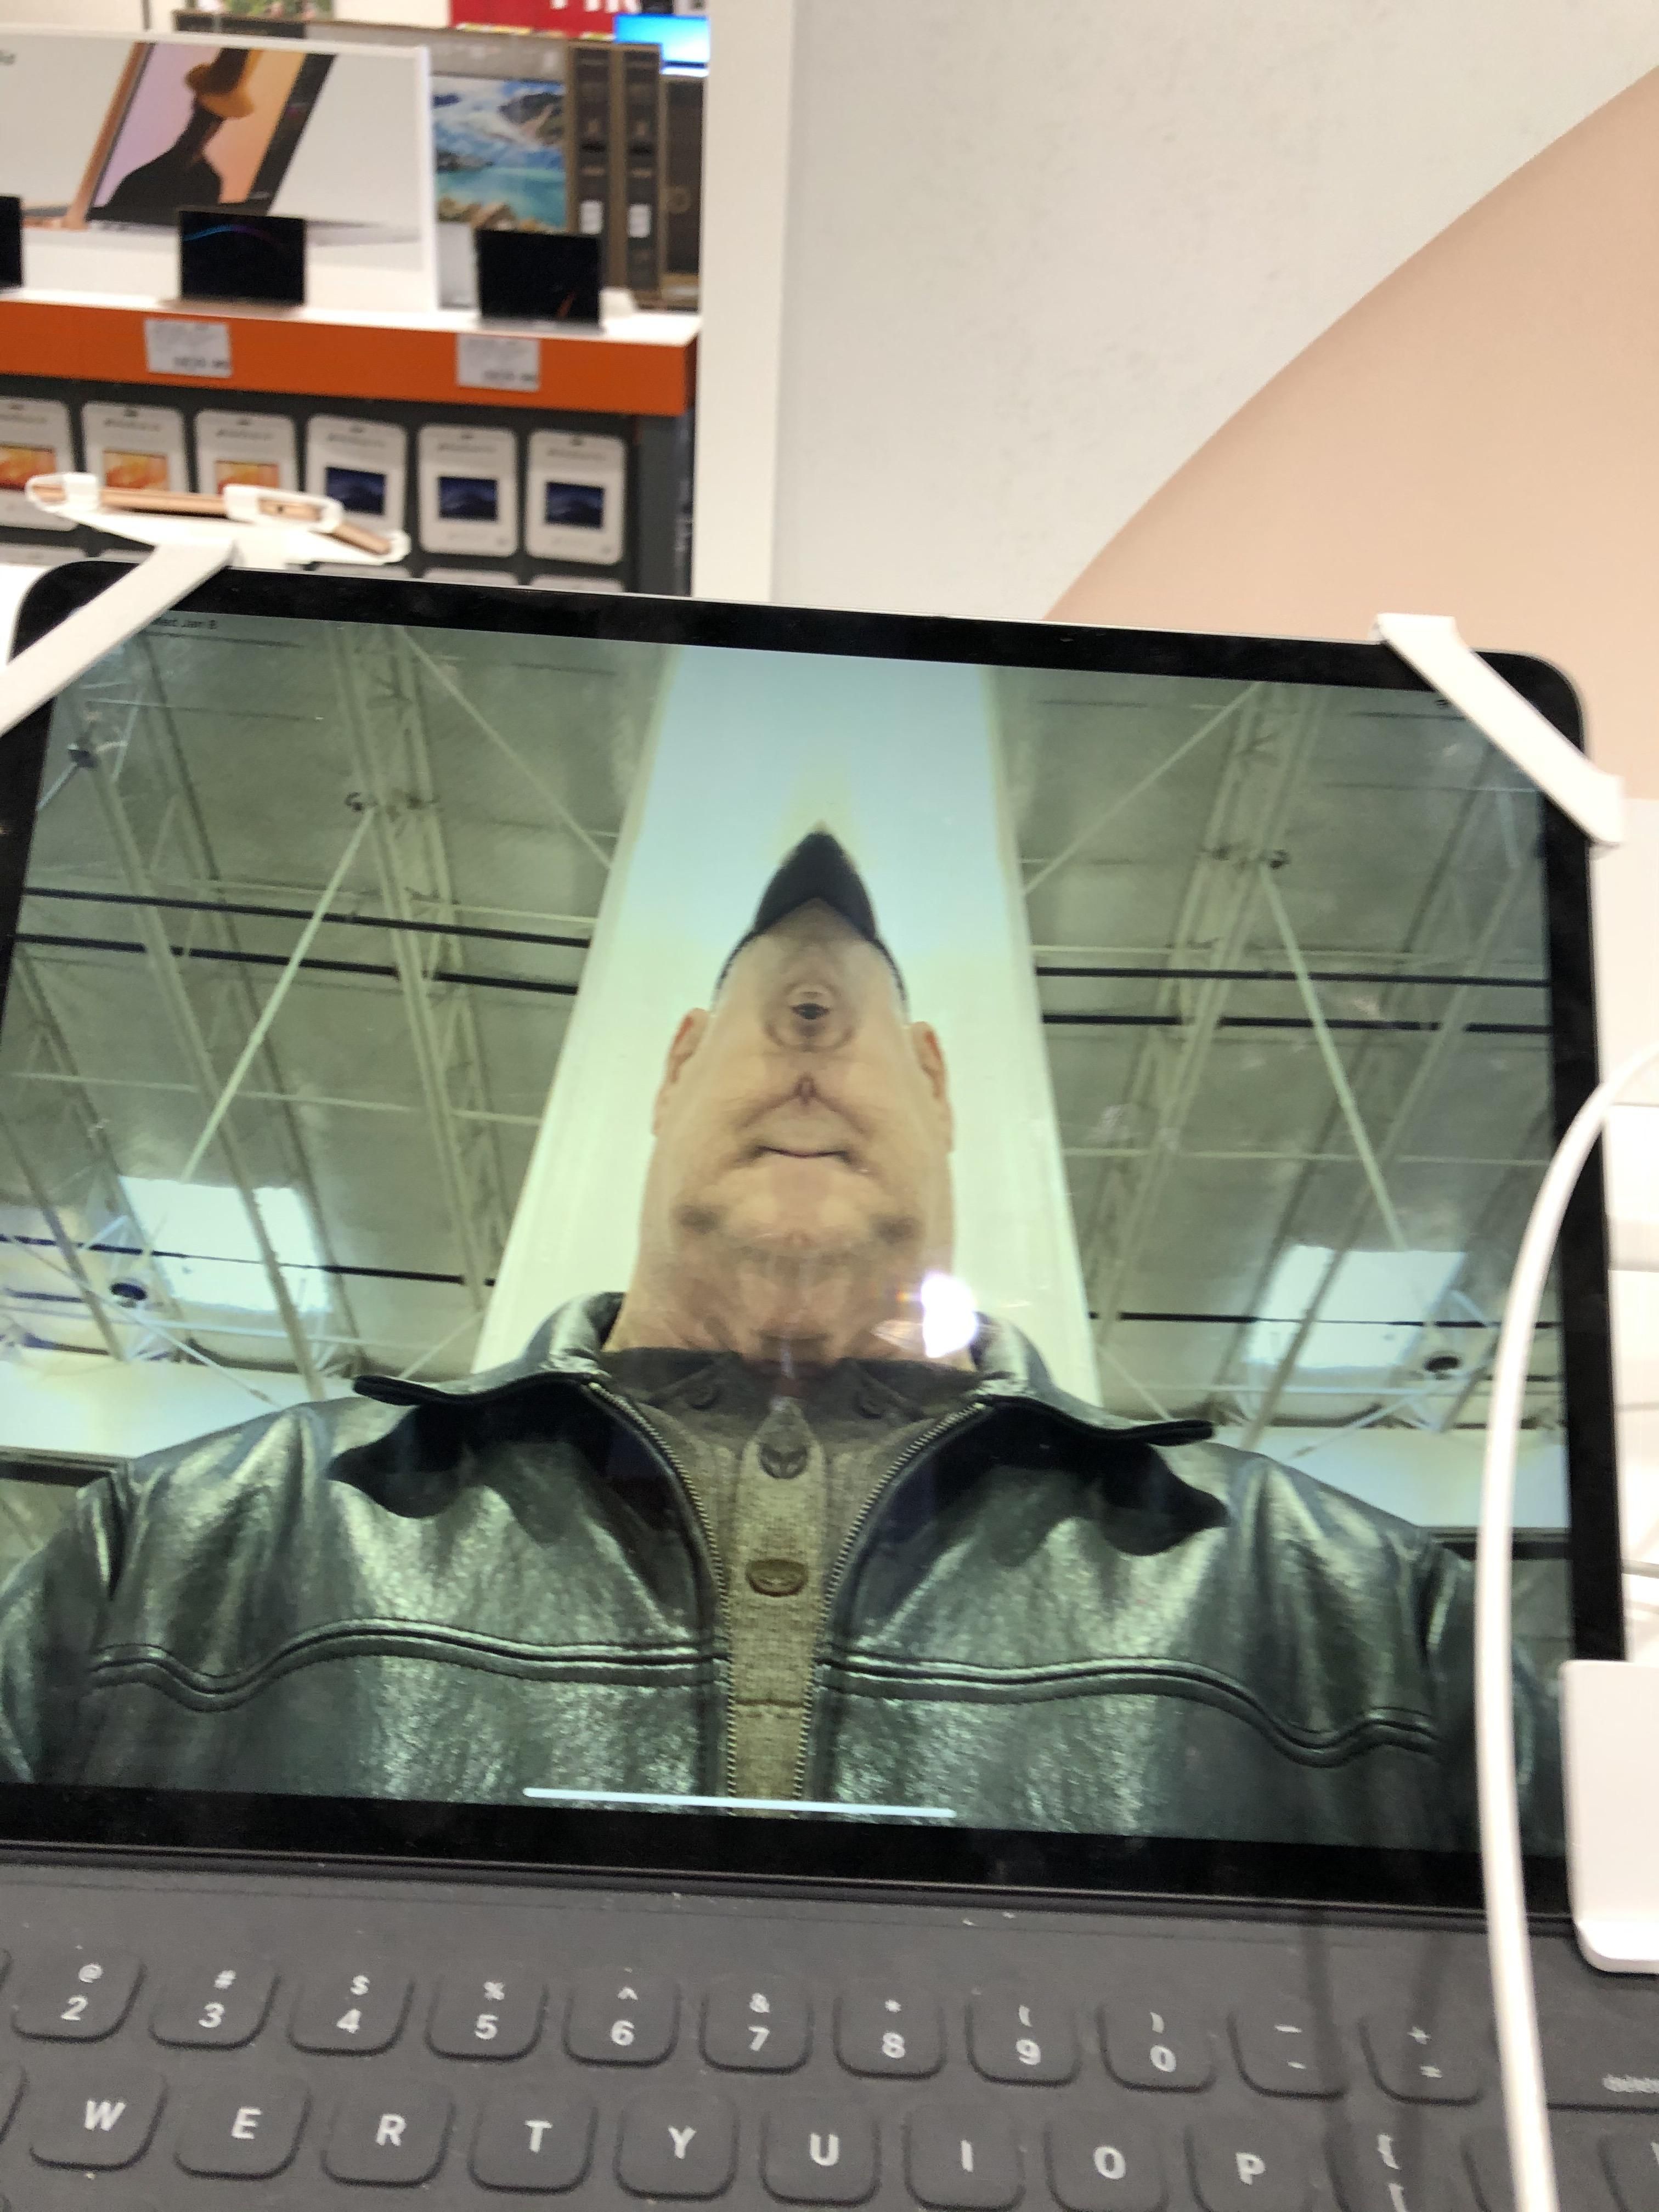 So I found this on an iPad display at my local Costco